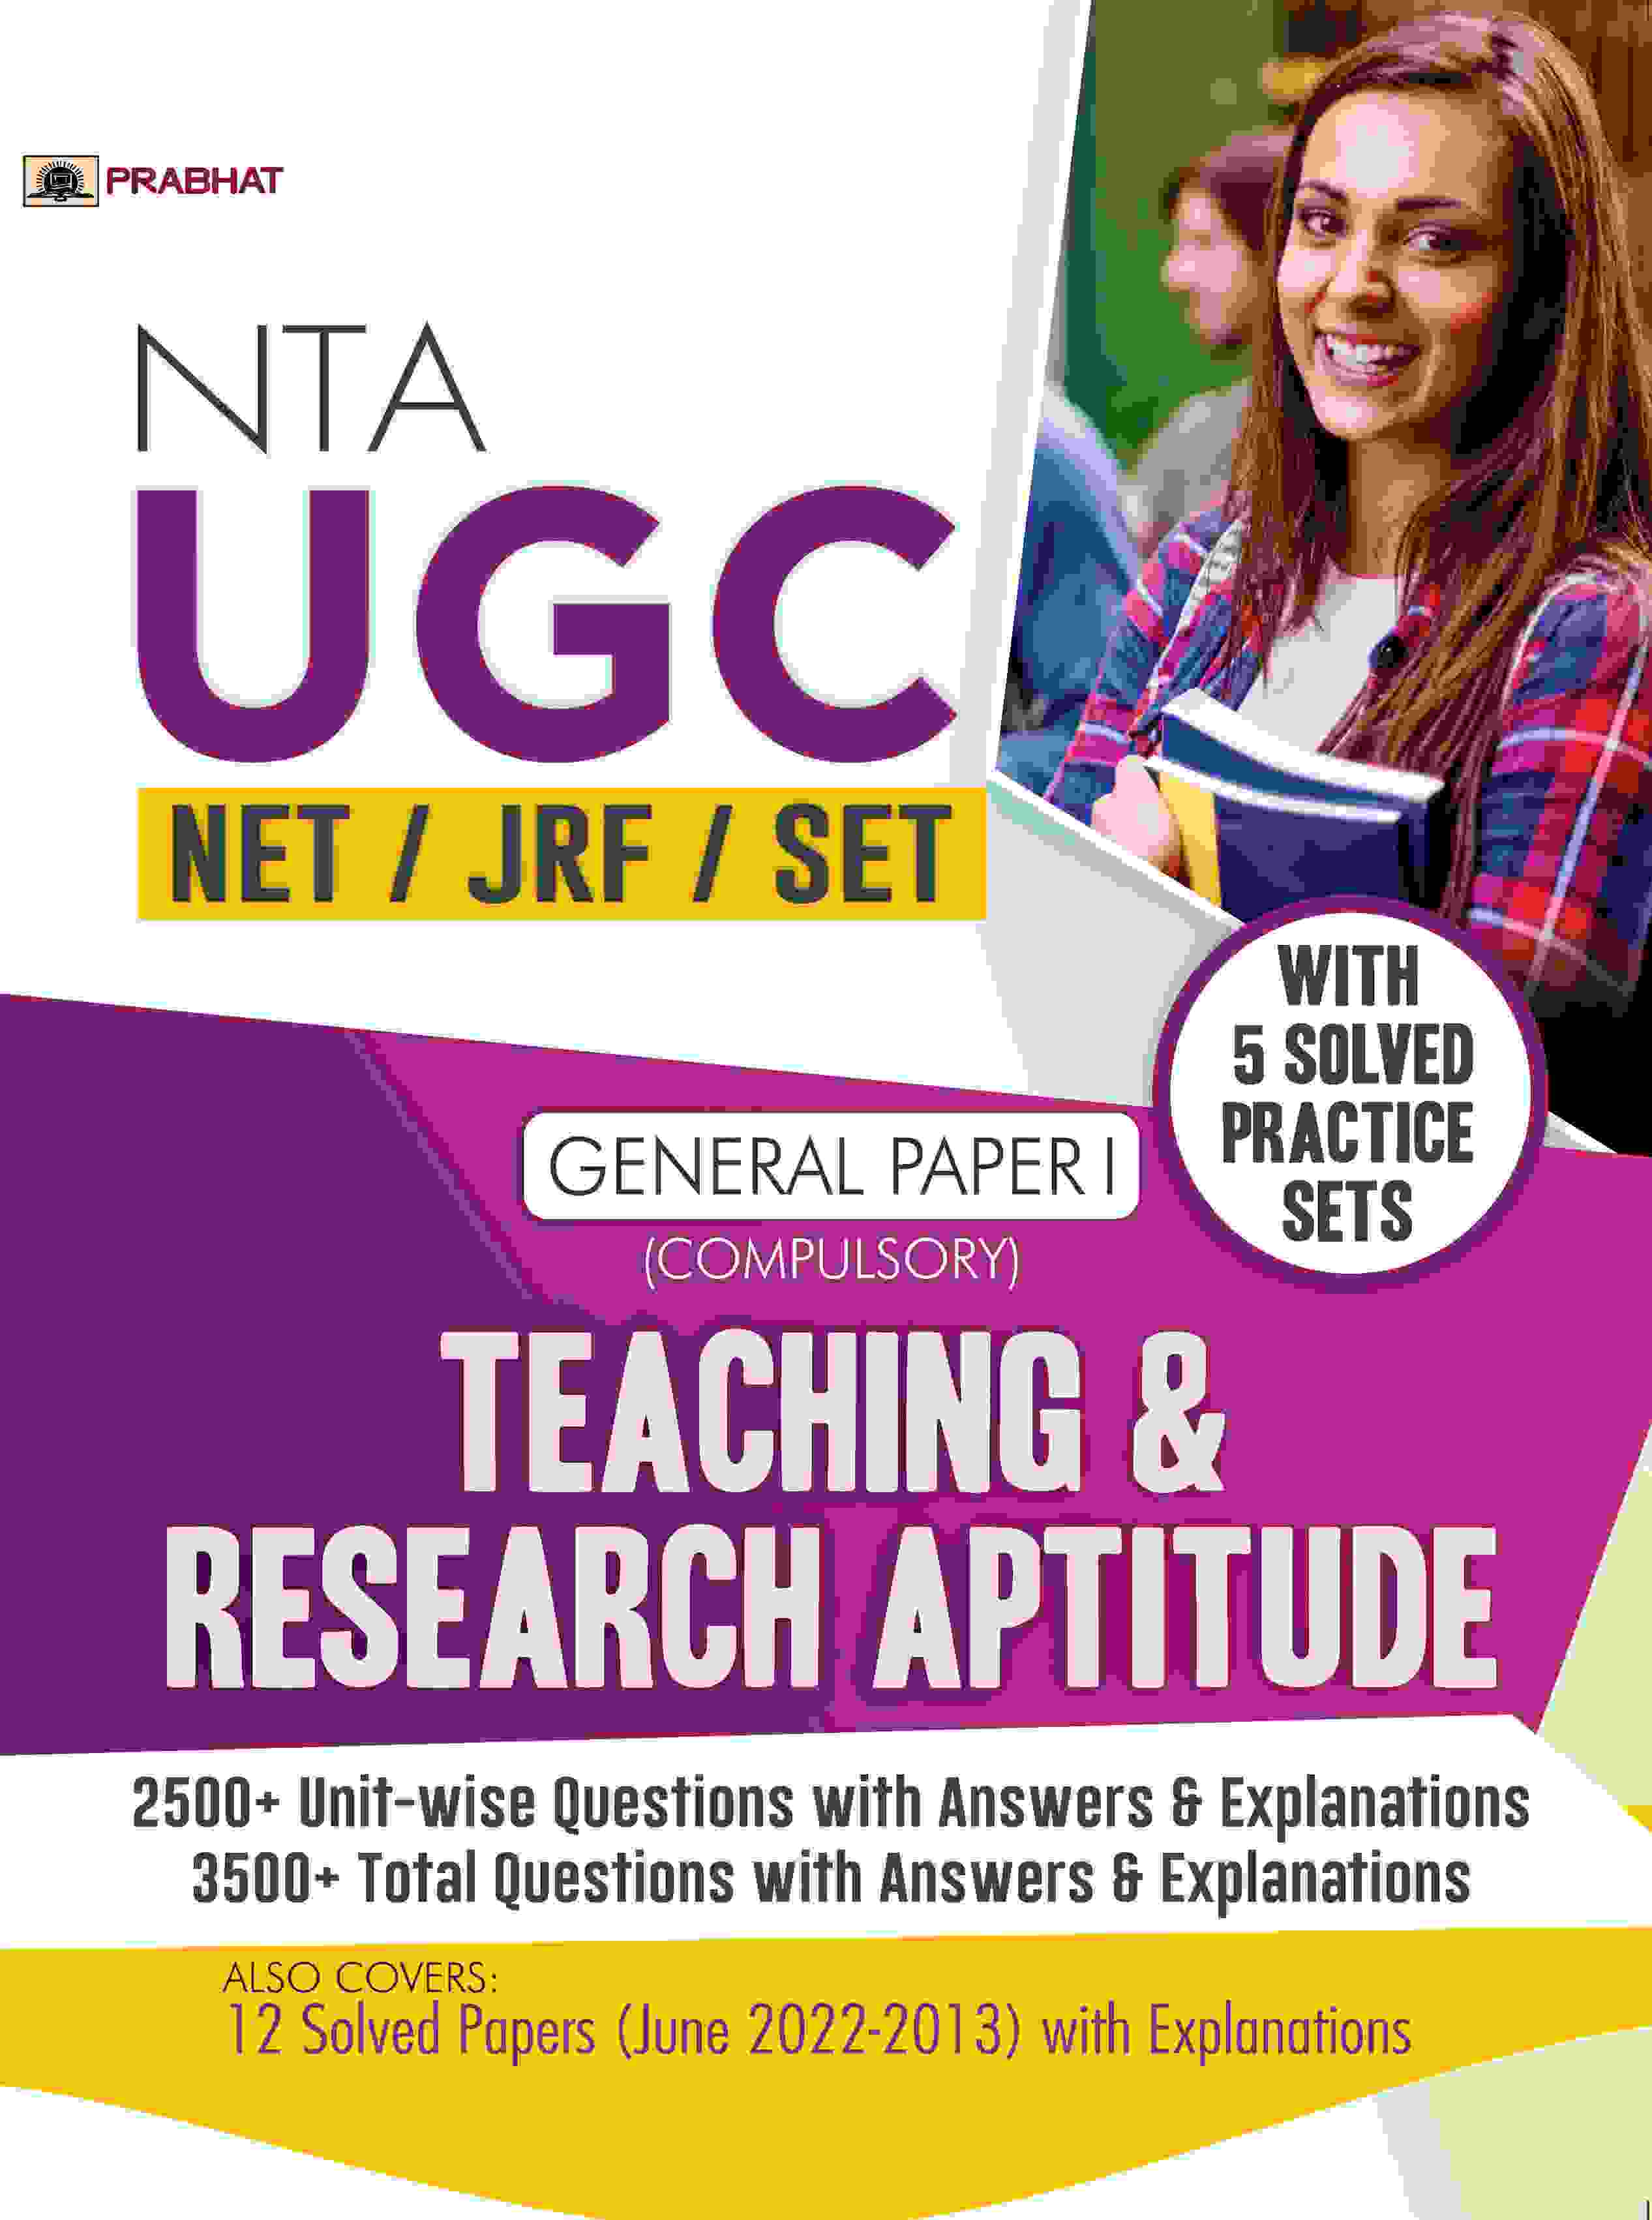 NTA UGC Paper 1 - NET/SET/JRF General Paper 1 Teaching & Research Aptitude (Include Latest Solved Papers & Practice Sets)